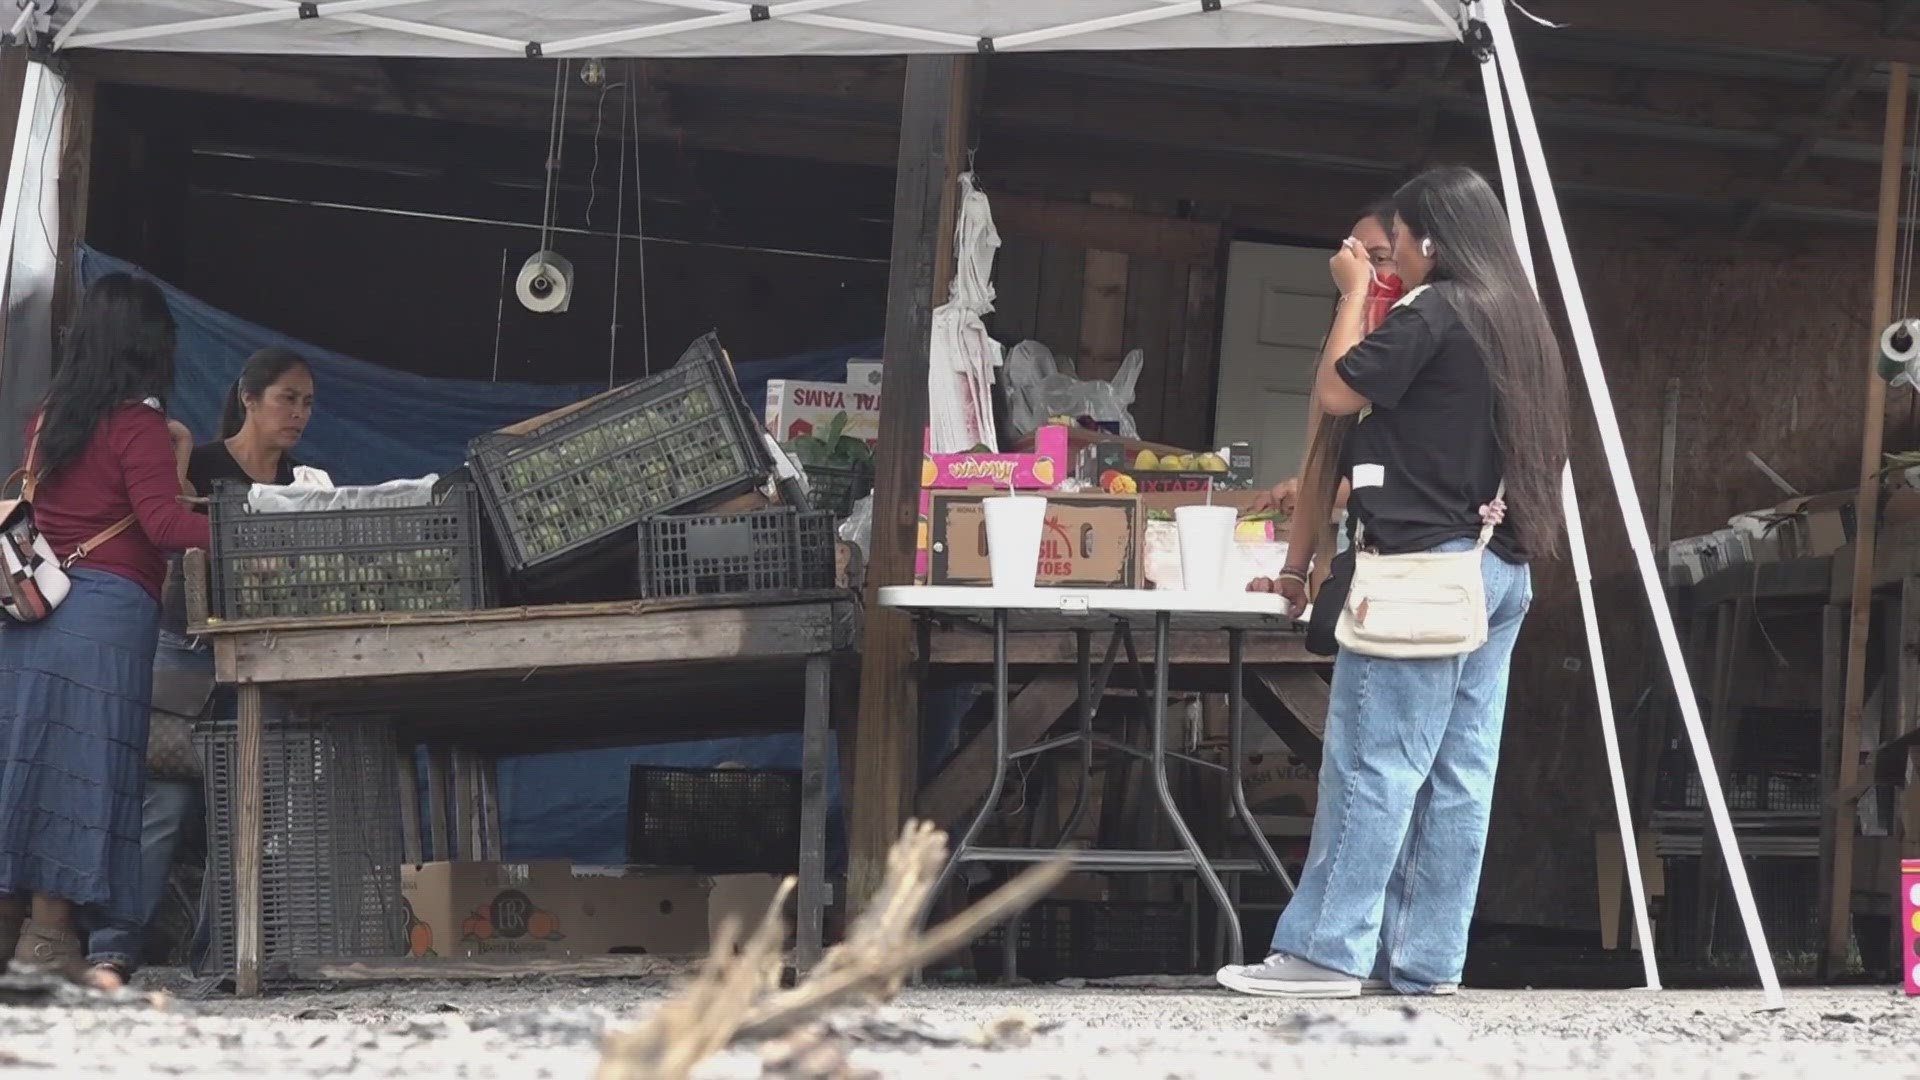 A fire swept through the flea market in early June. Around a month later, organizers of the flea market said it would reopen.